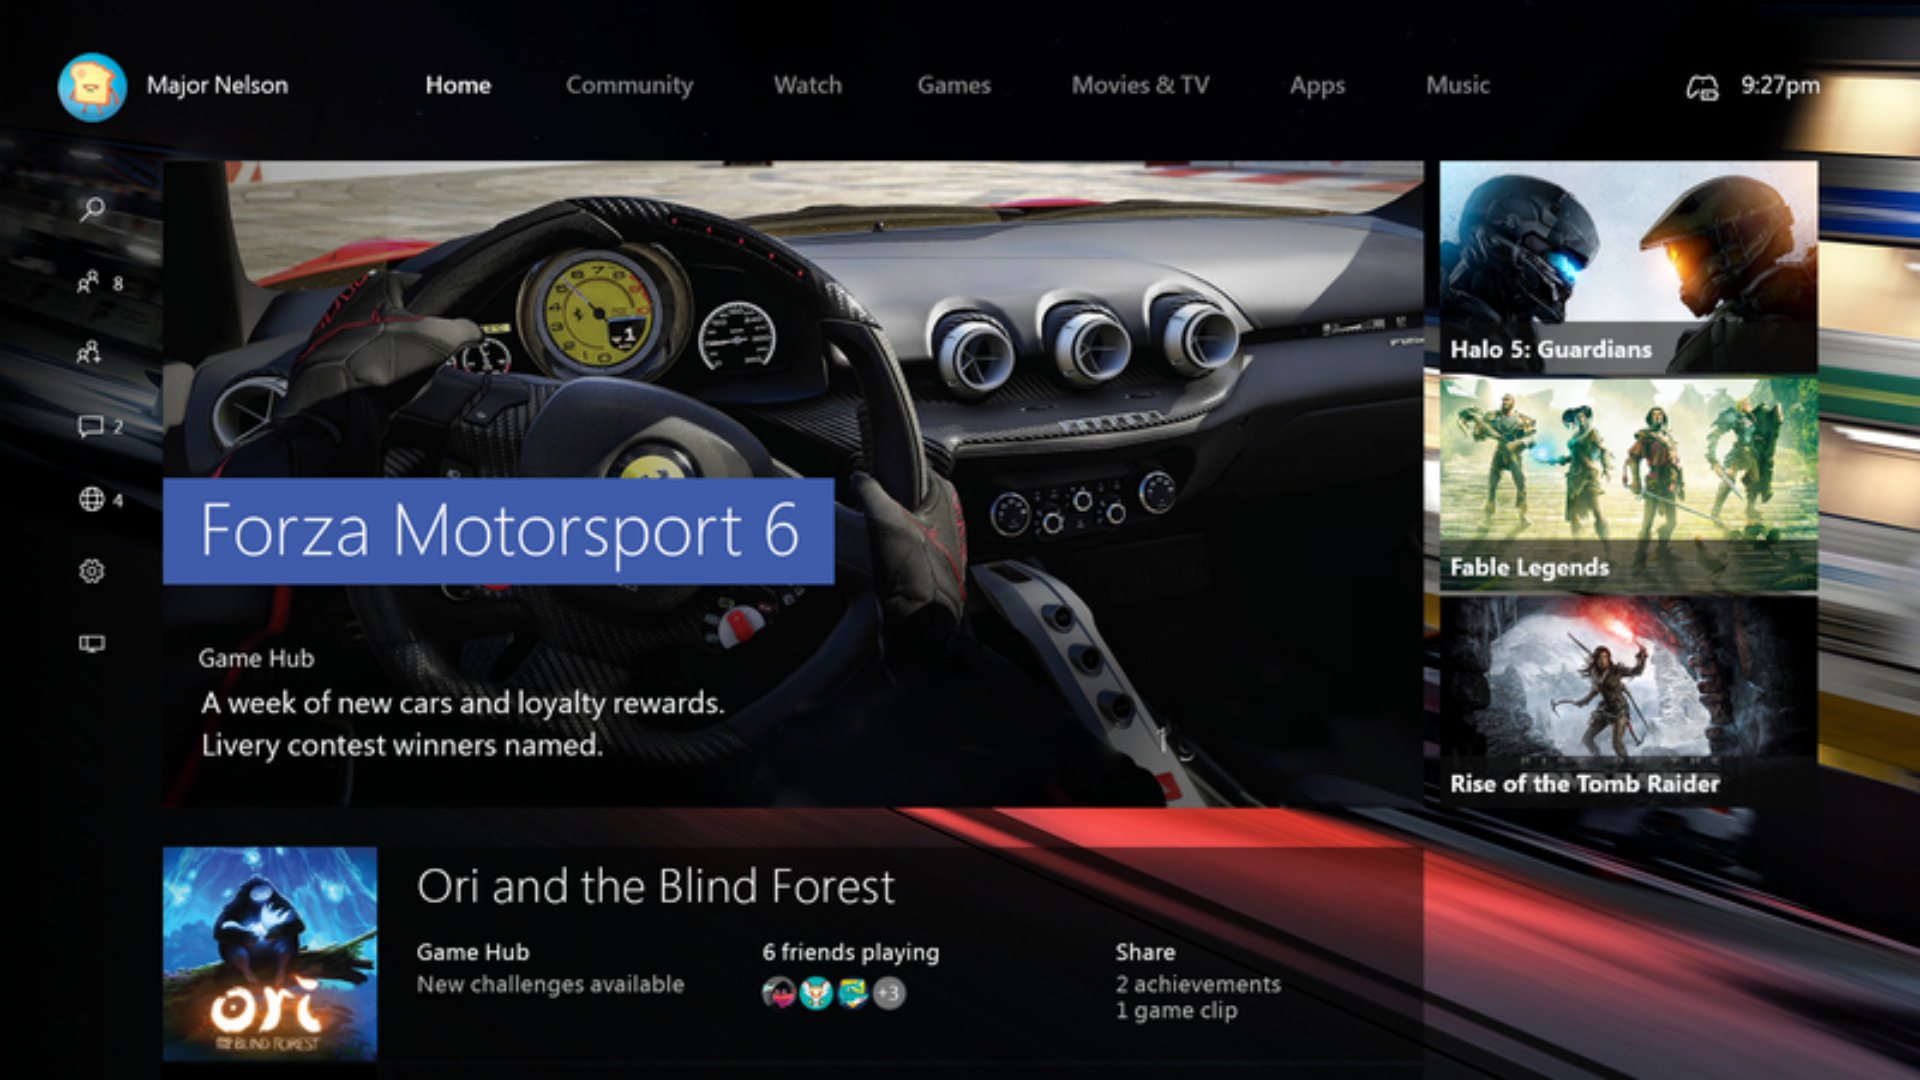 Information on the New Xbox One Experience Update